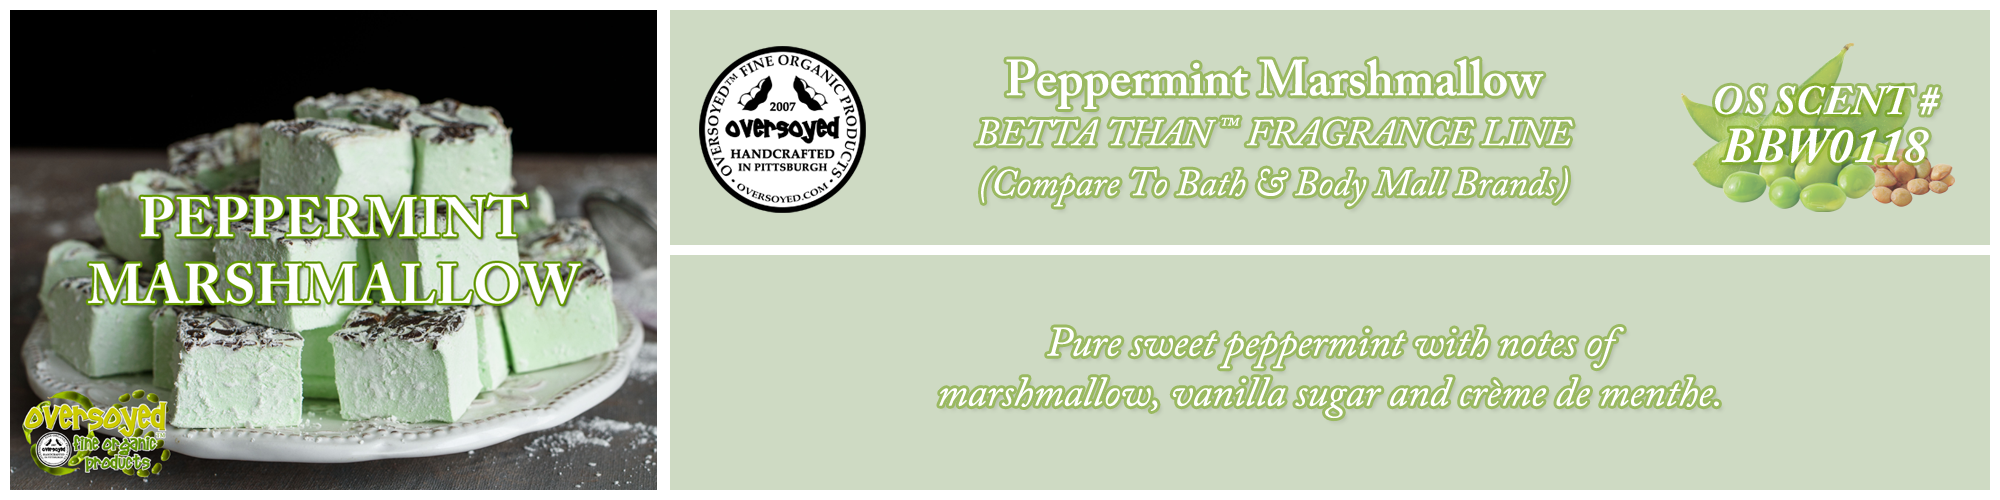 Peppermint Marshmallow Handcrafted Products Collection